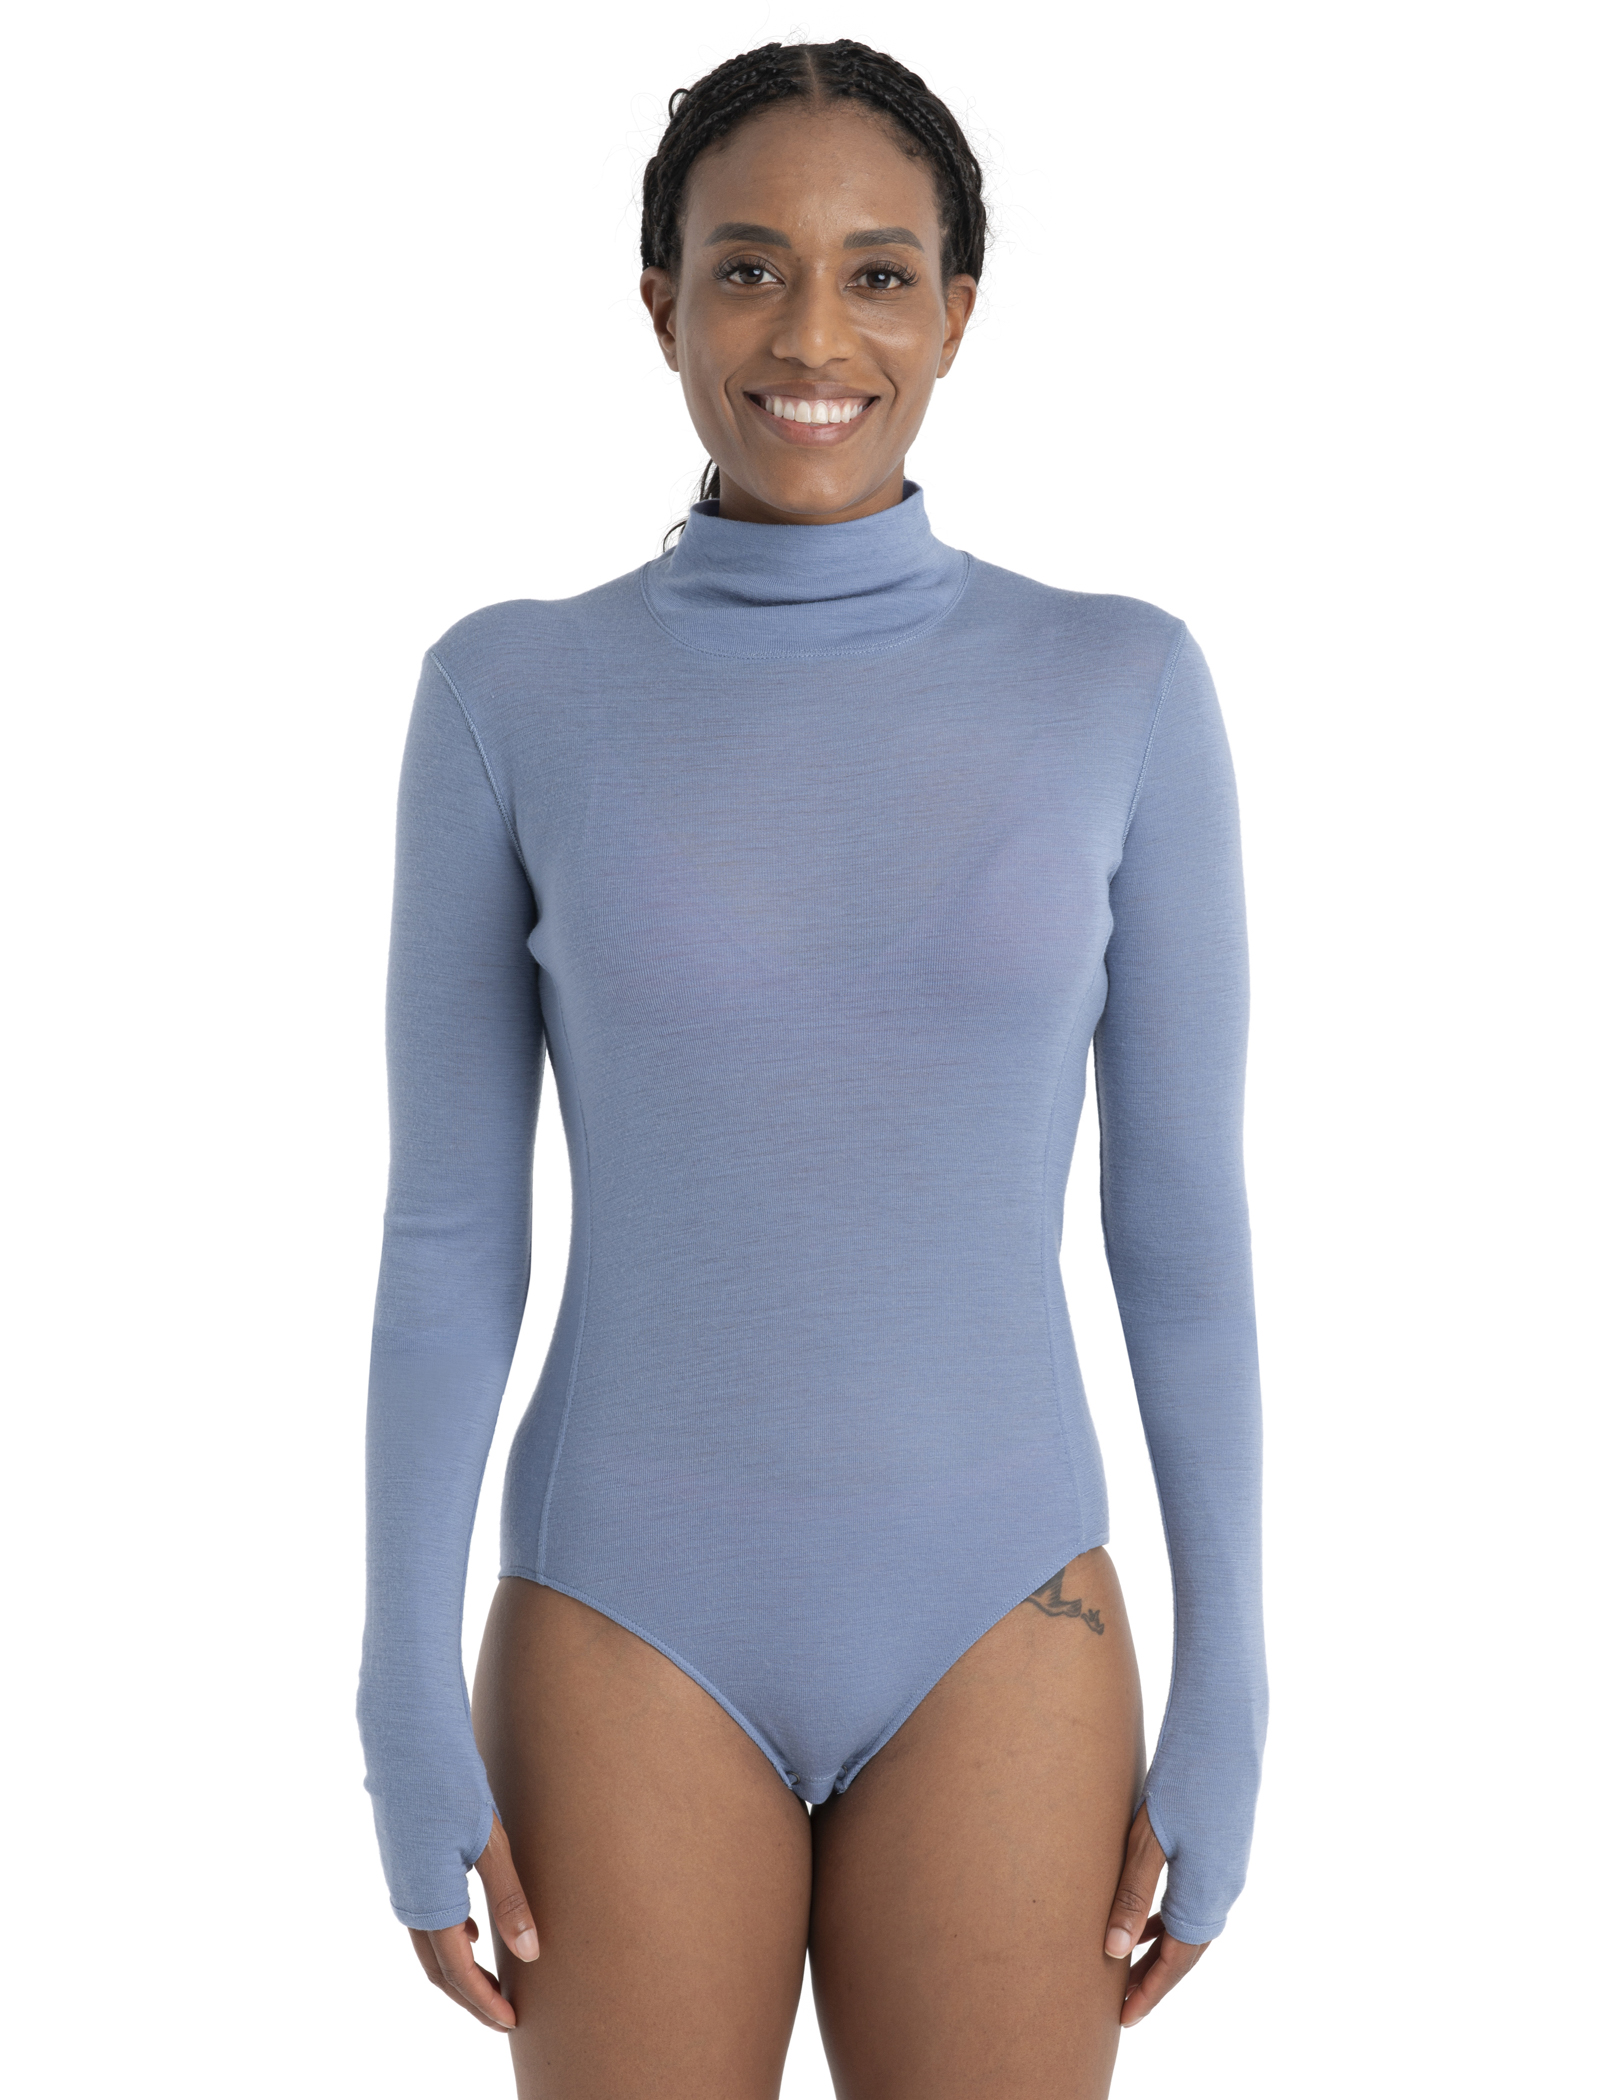 Big 30% Discount Womens Round Neck Bodysuit Leotard Long Sleeve Top Ladies  Stretchy Body Top 2023 New